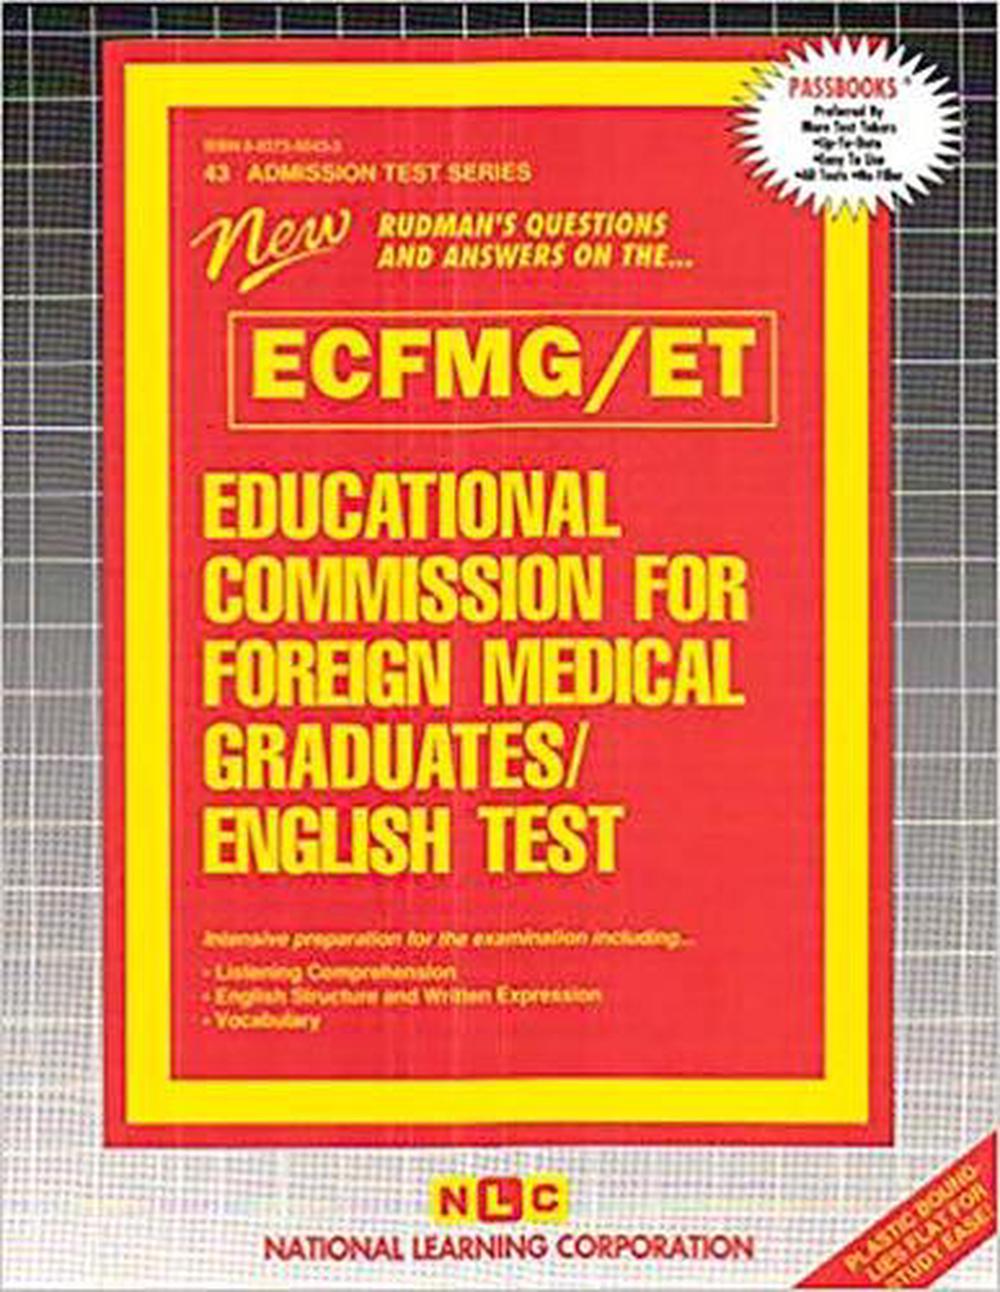 educational commission for foreign medical graduates